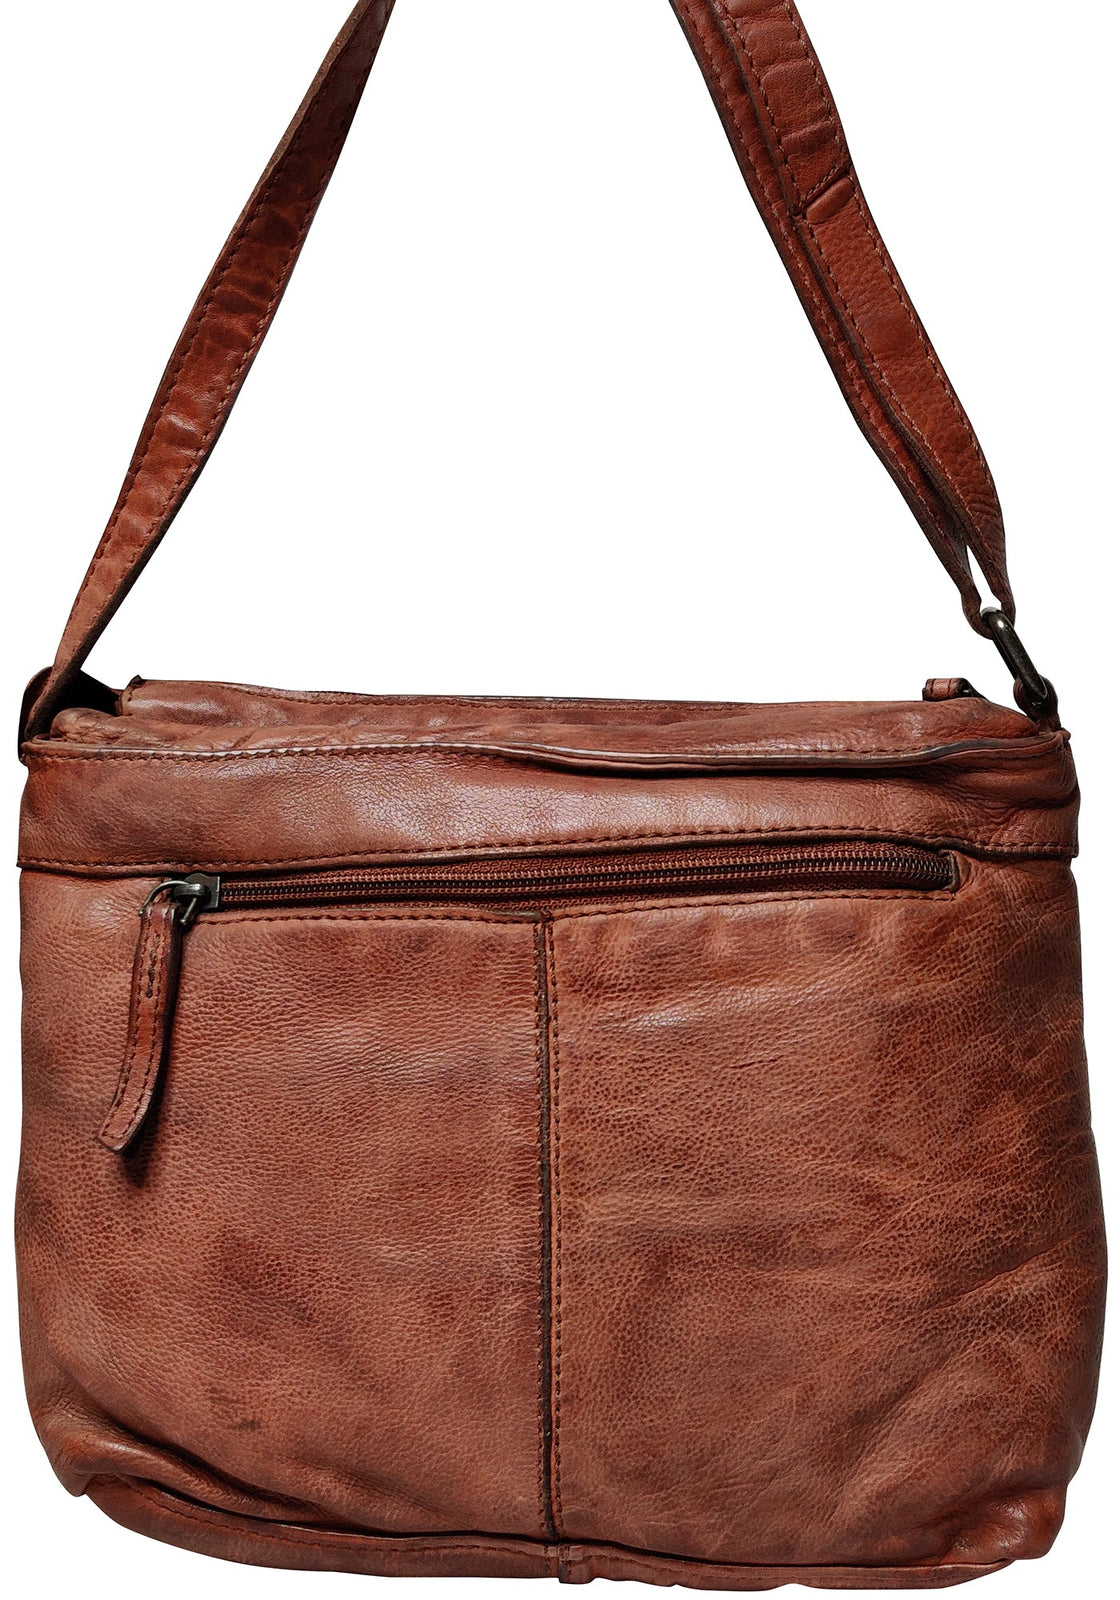 Leather Crossbody Bag for Women, Brick Red